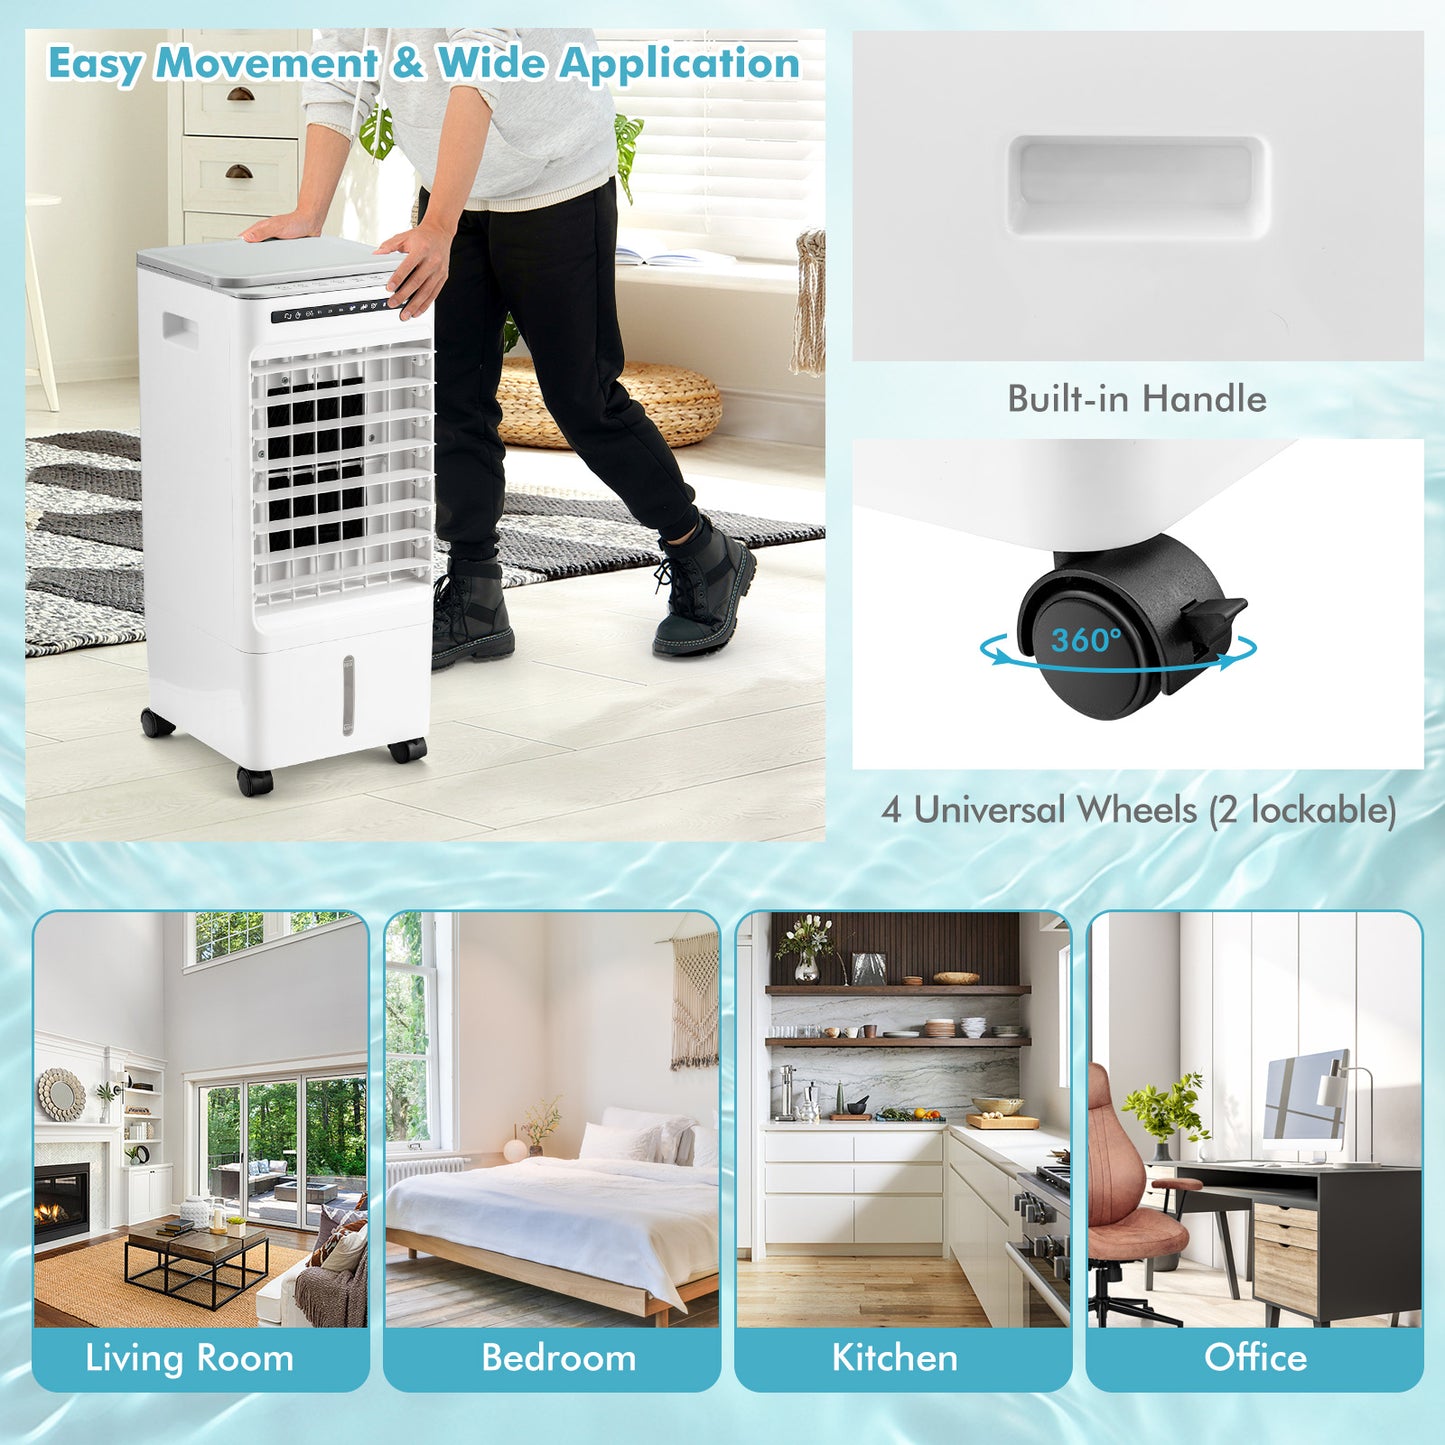 3-in-1 Evaporative Portable Air Cooler with 3 Modes include Remote Control-White